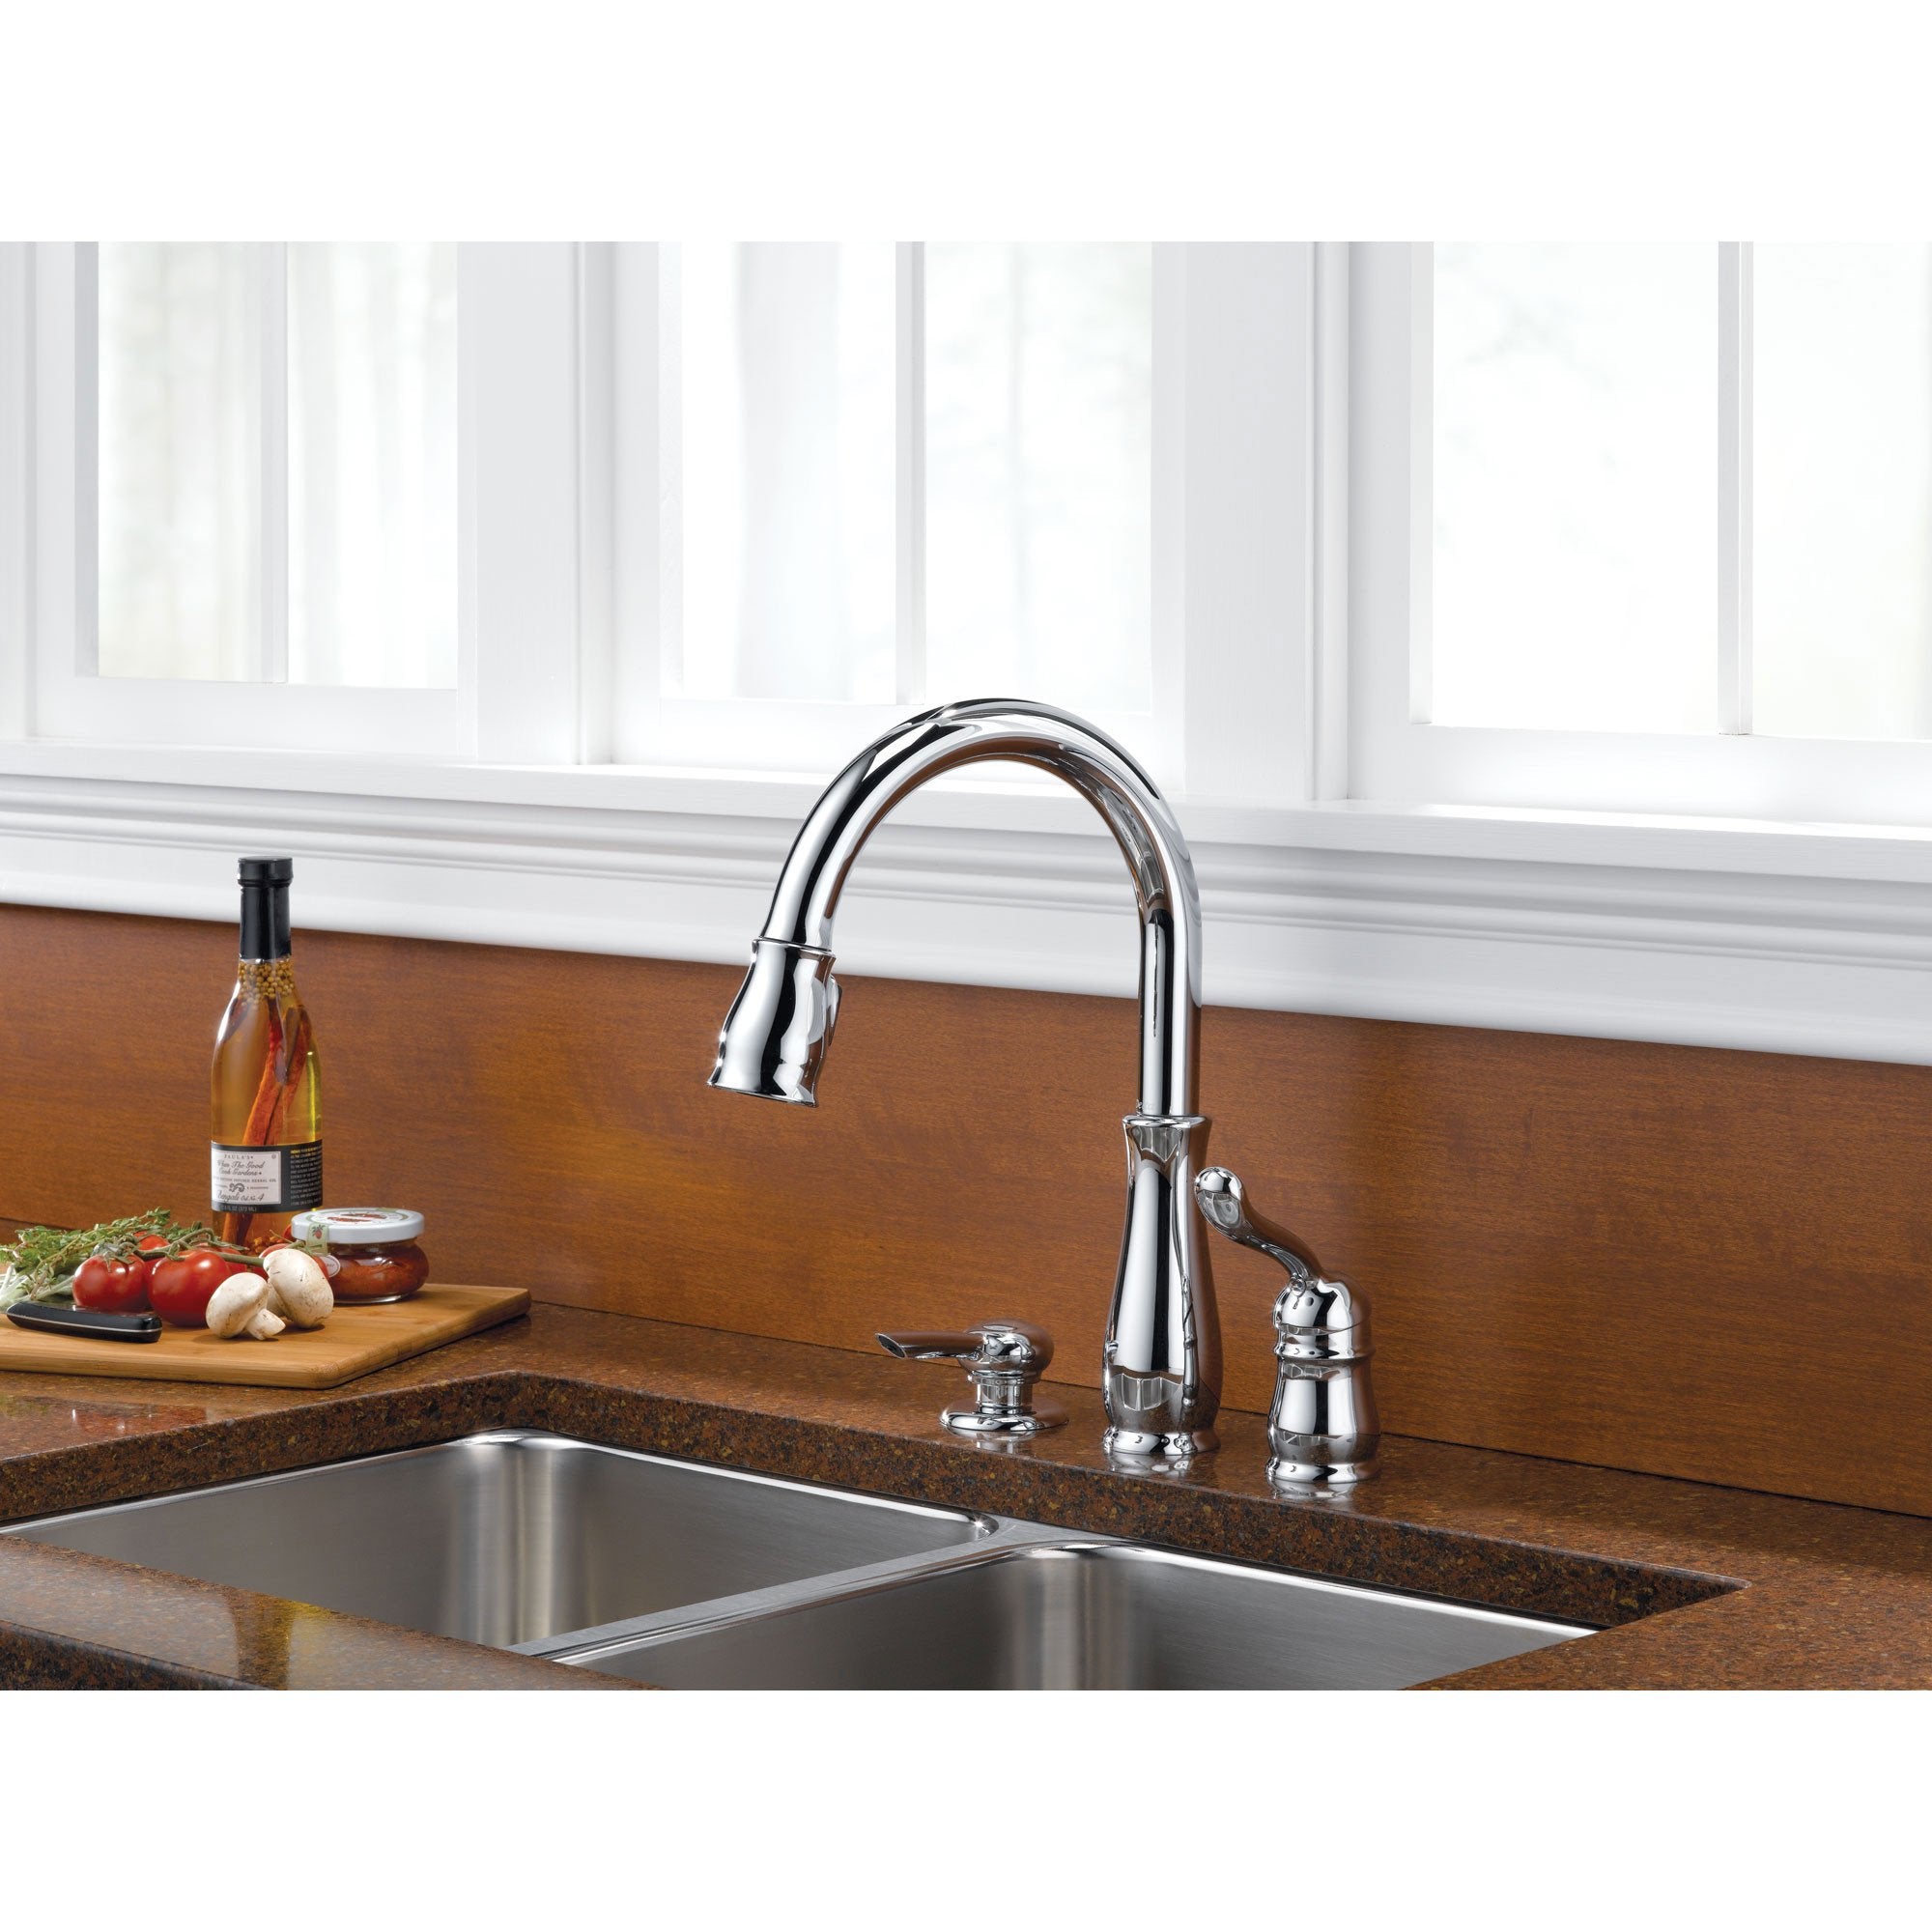 Delta Leland Collection Chrome Finish Single Handle Pull Down Kitchen Faucetlistcom